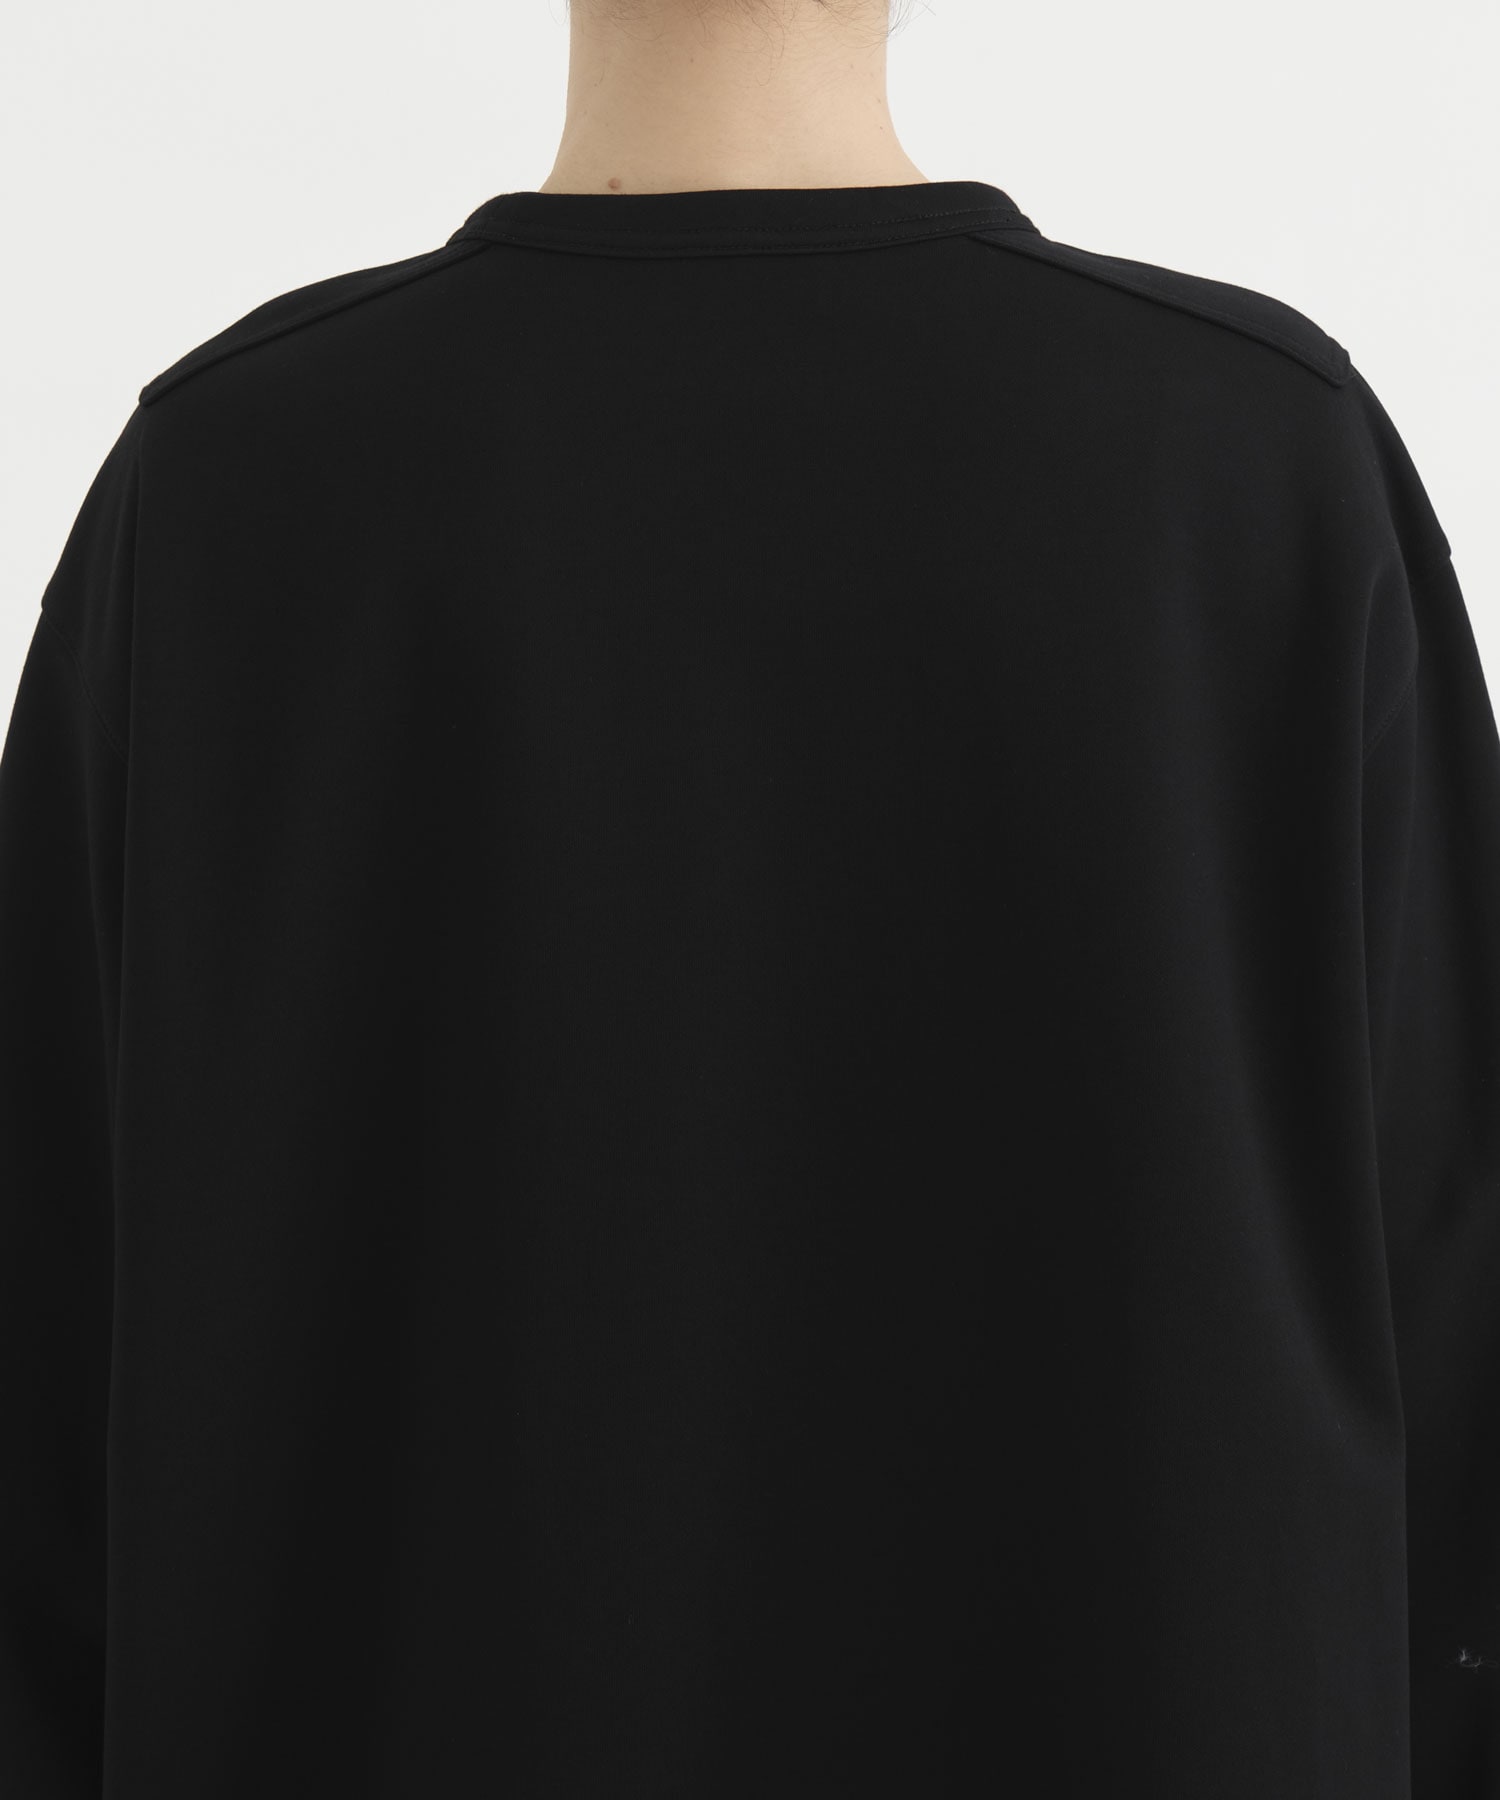 THE LONG SLEEVE COMAND T-SHIRT THE RERACS